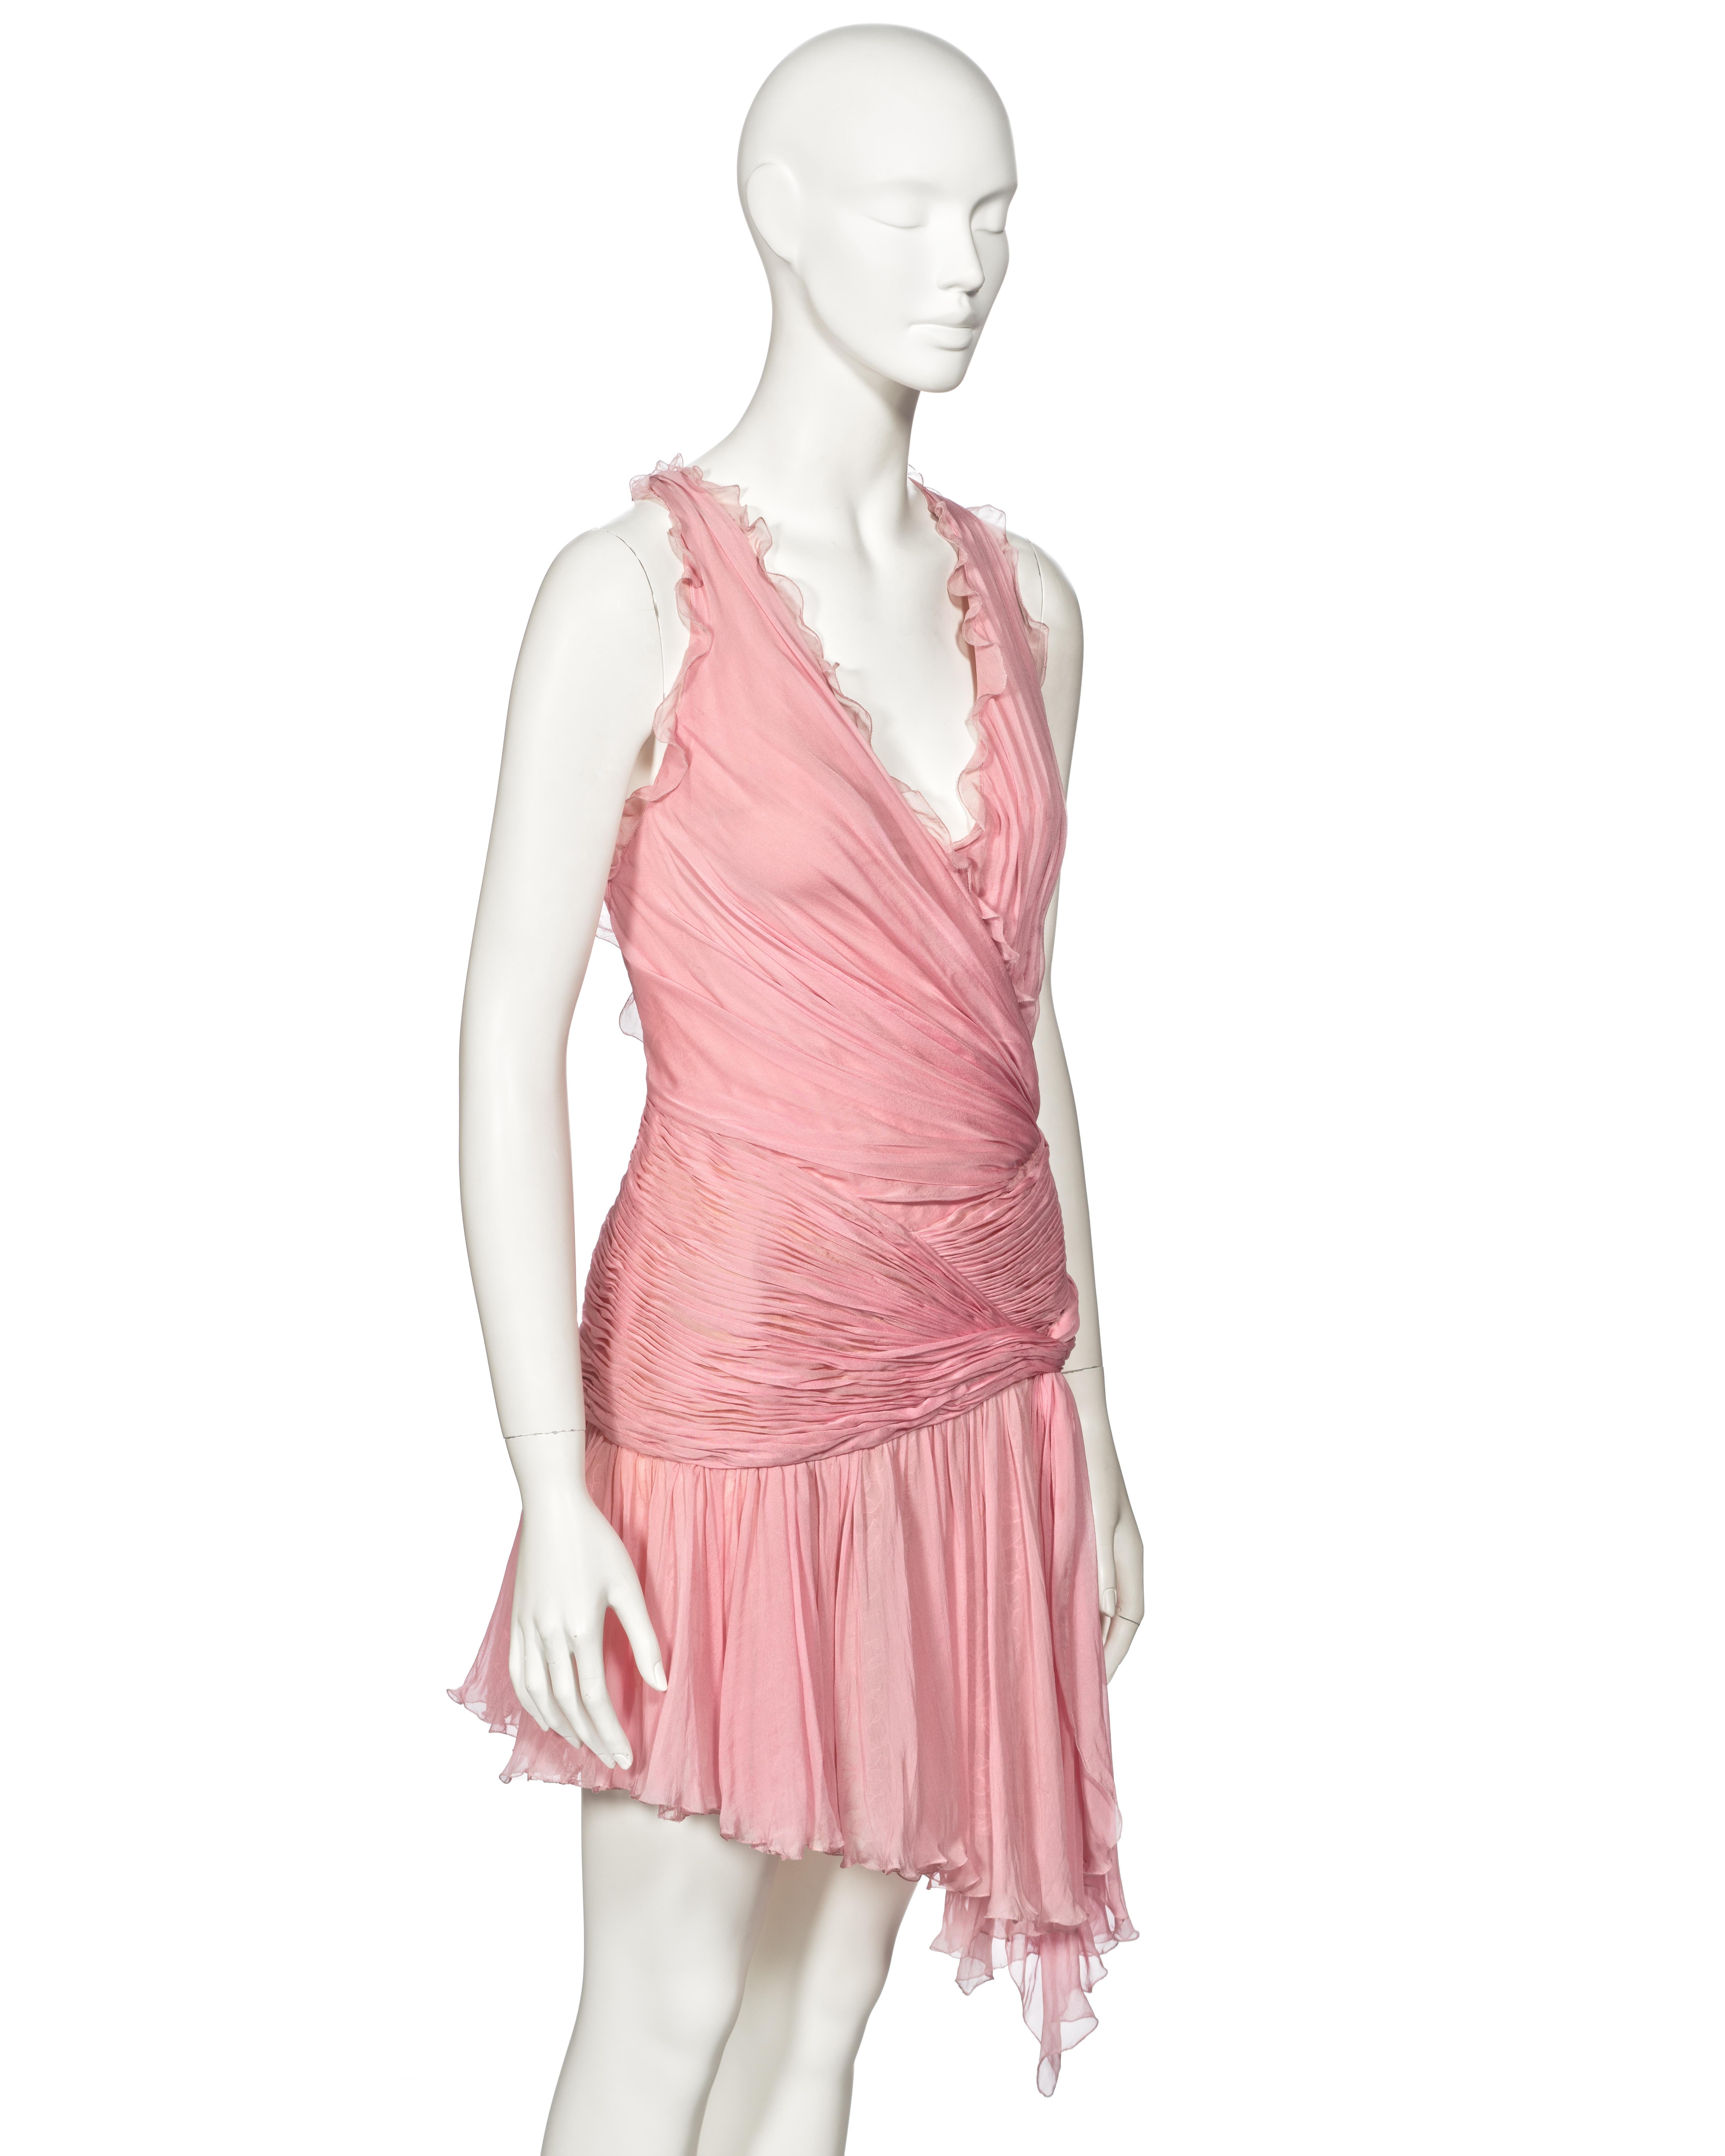 Atelier Versace Couture Pink Pleated Silk and Lace Mini Dress, ss 2004 For Sale 1